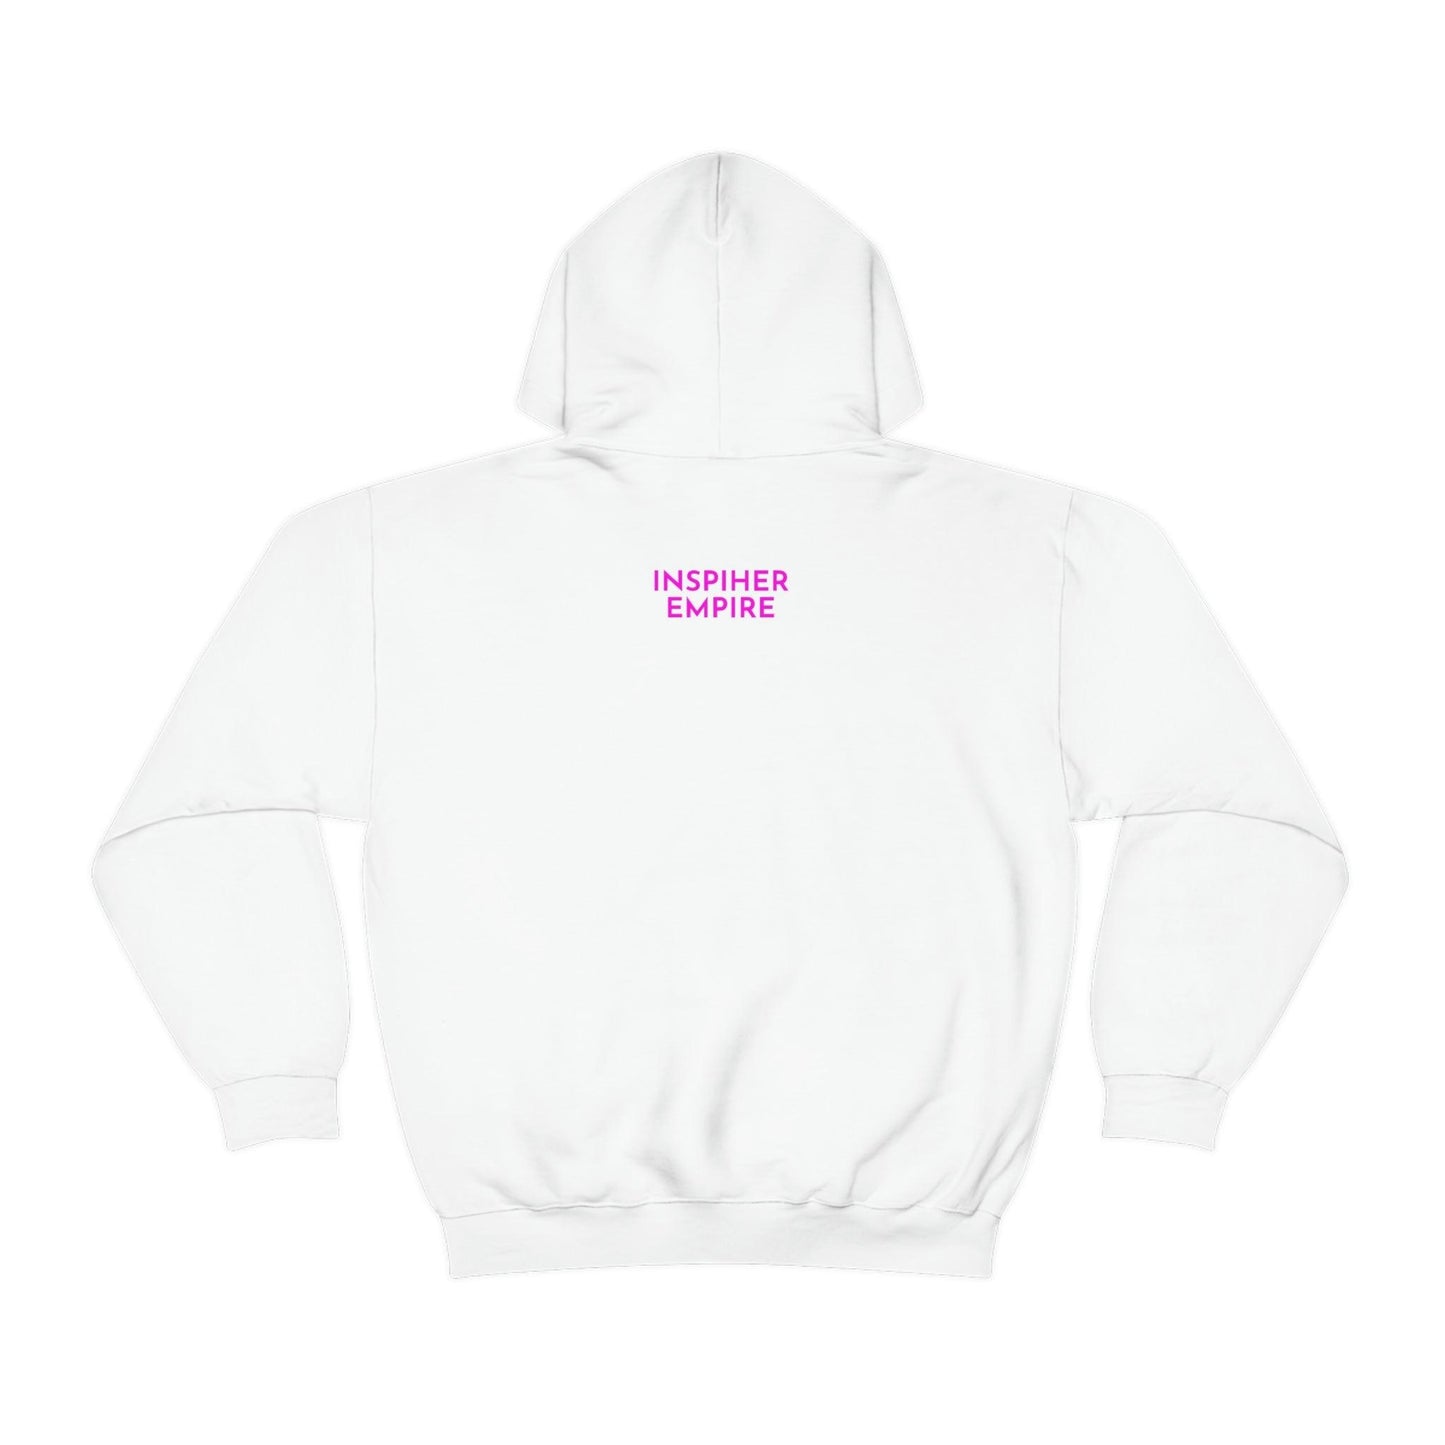 No Competition Hoodie